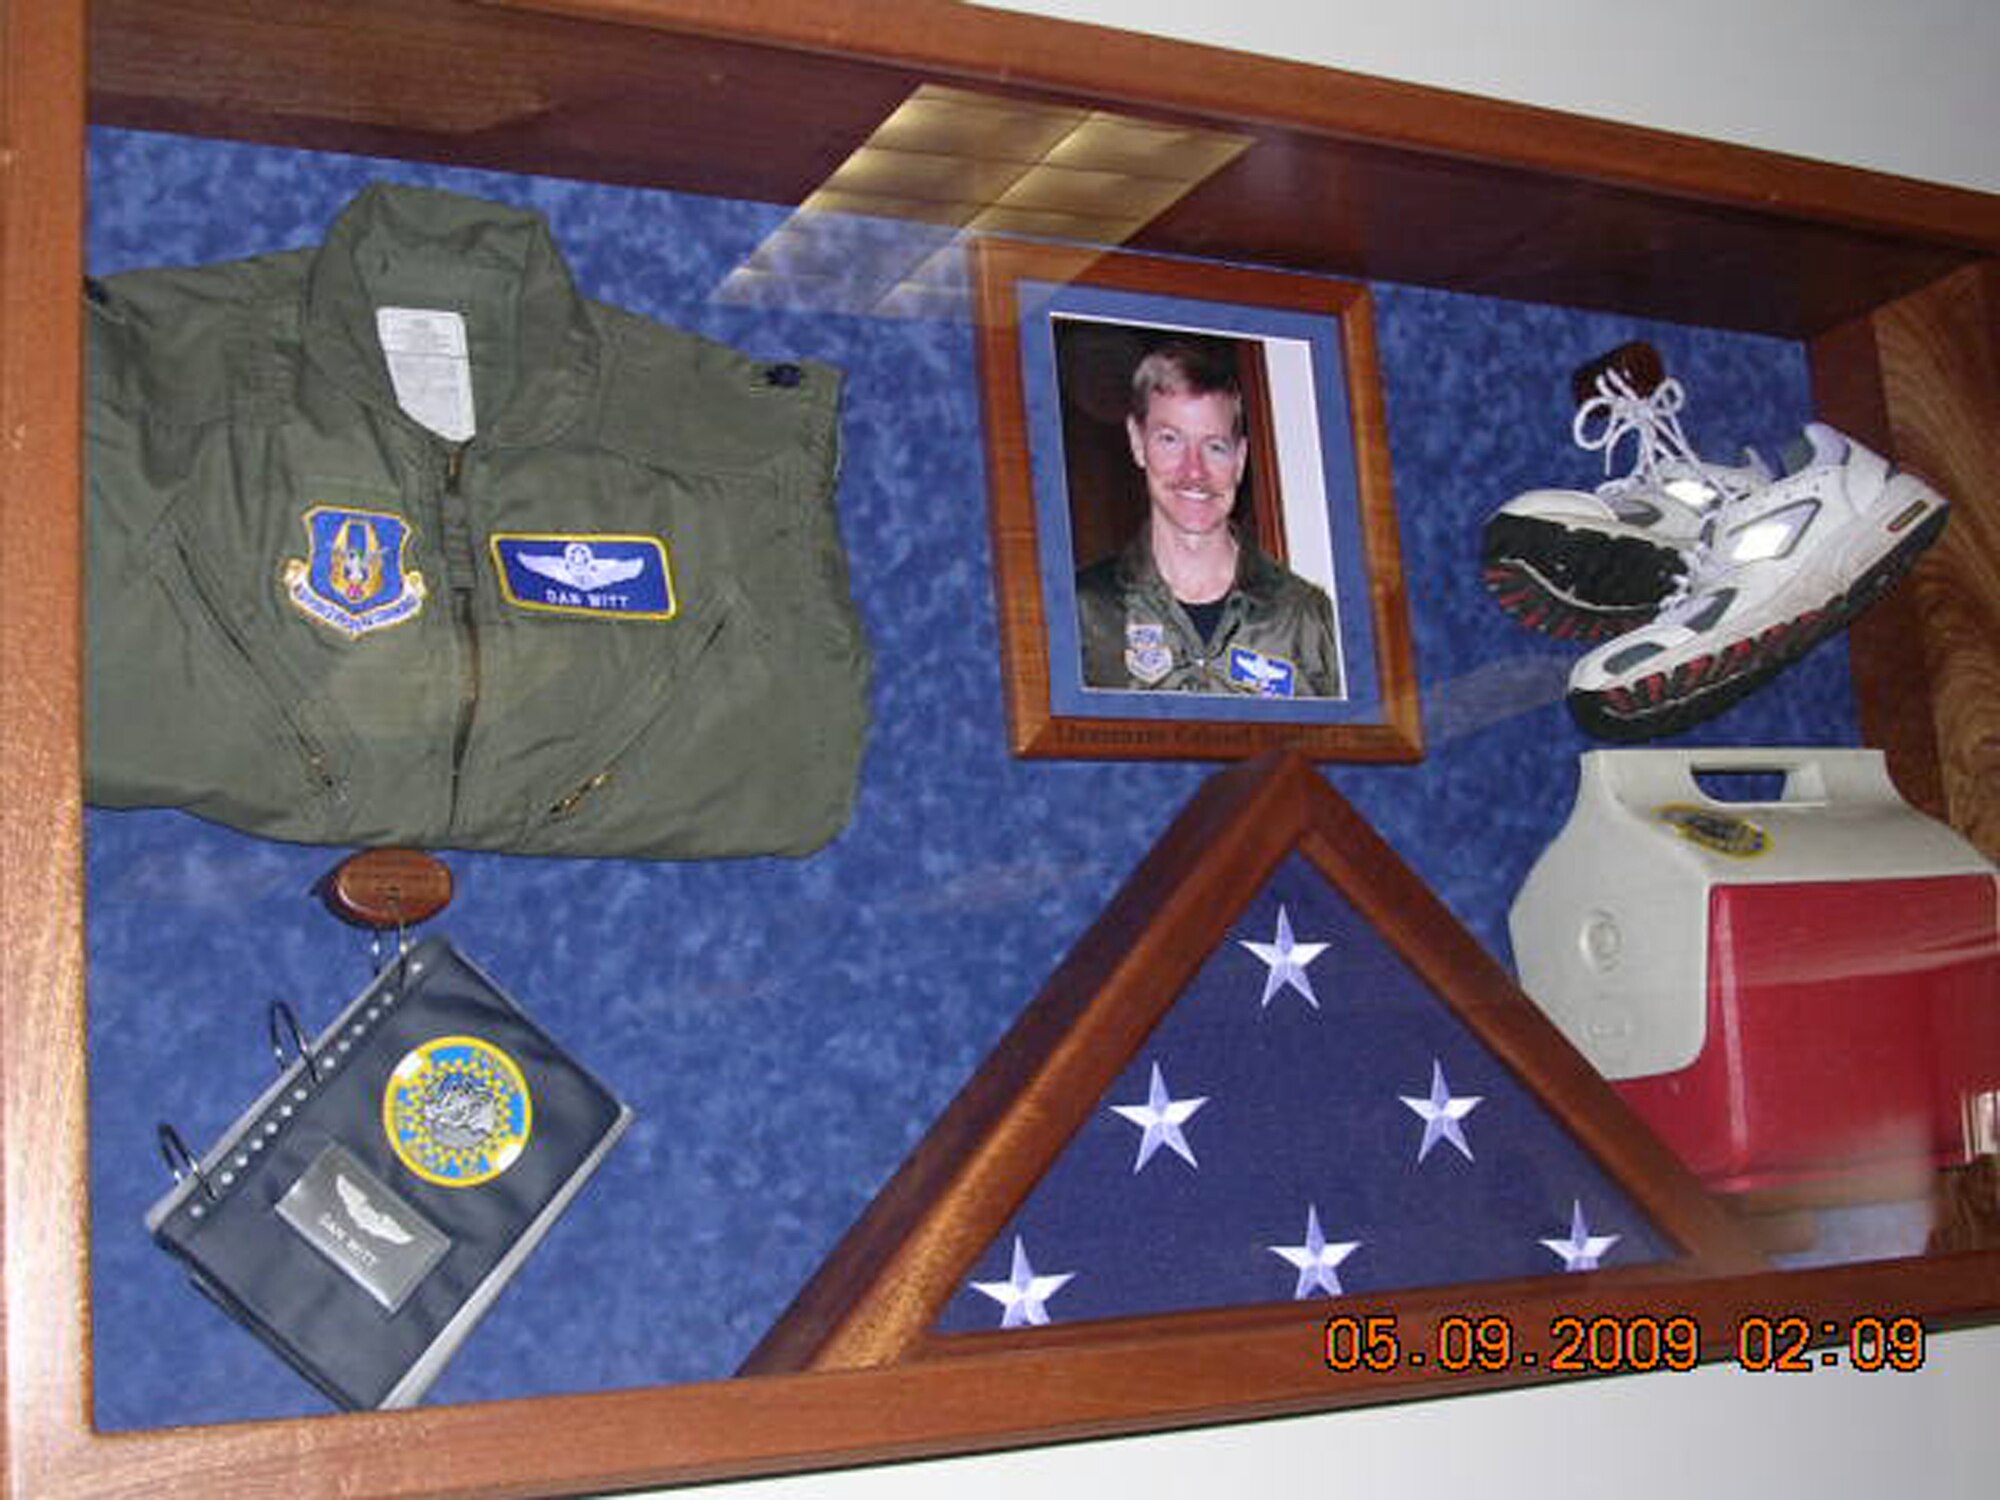 WRIGHT-PATTERSON AIR FORCE BASE, Ohio - The 89th Airlift Squadron dedicated an auditorium to the late Lt. Col. Dan Witt, who was assigned to the squadron.  A shadow box containing the personal items of Colonel Witt is on display in the auditorium. (Courtesy photo)